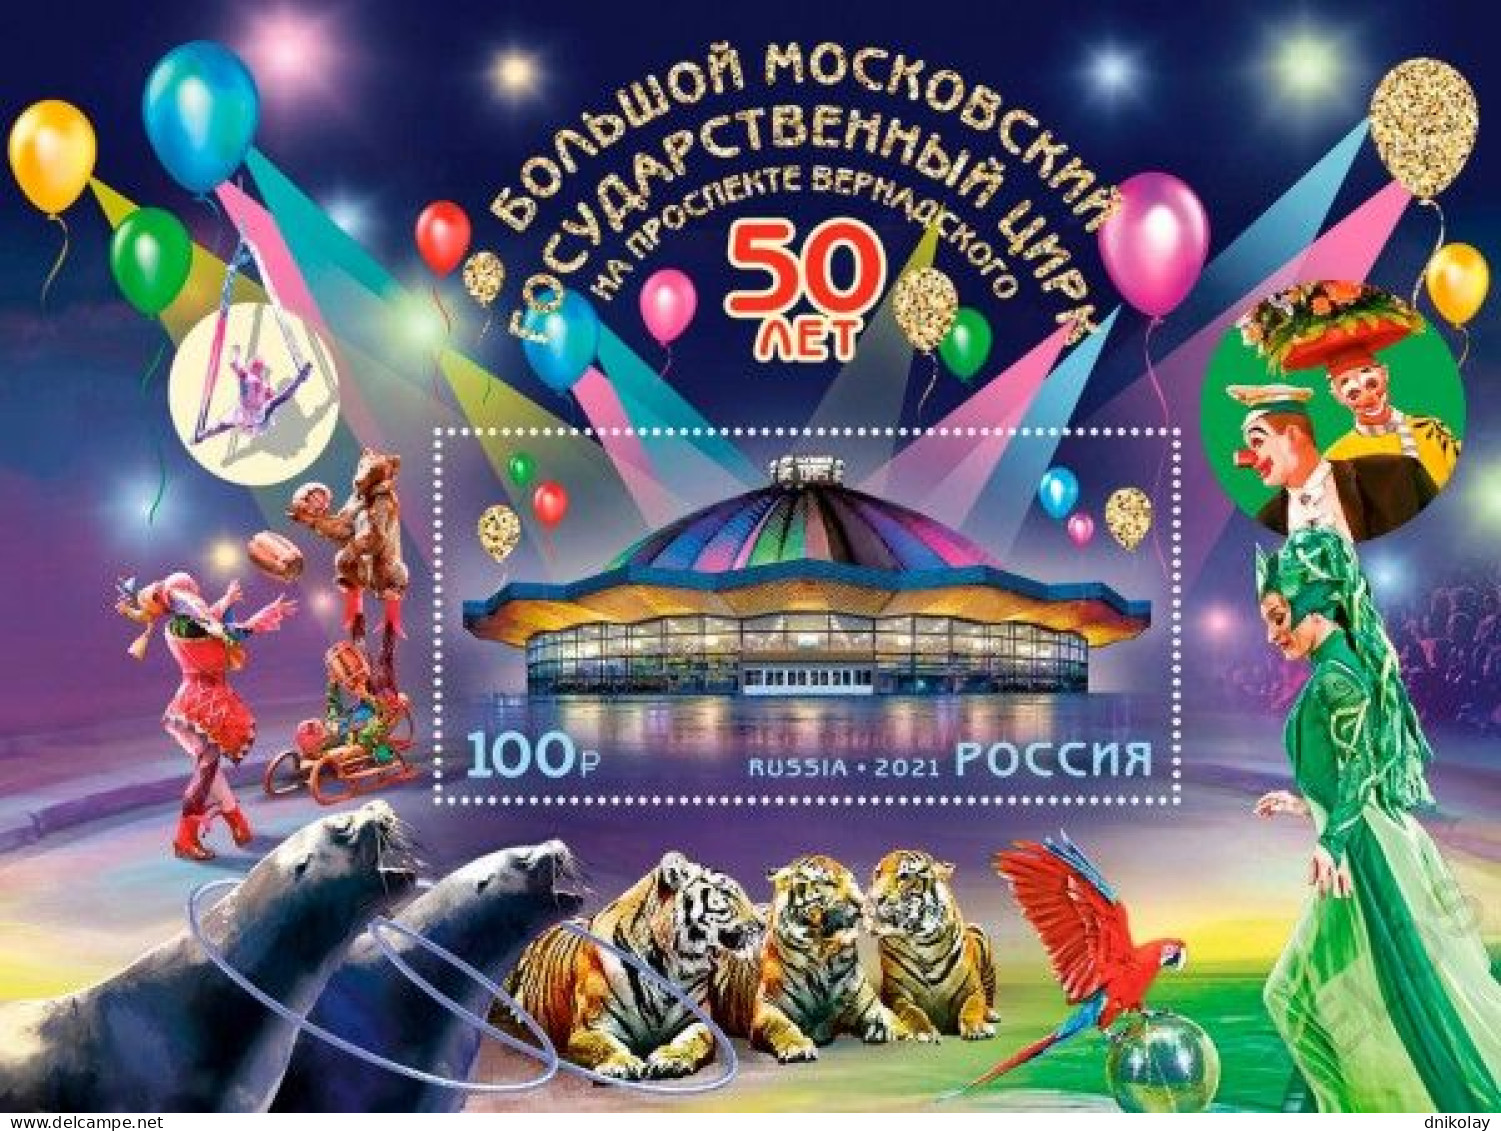 2021 3008 Russia Booklet The 50th Anniversary Of The Great Moscow State Circus On Vernadsky Avenue MNH - Nuevos